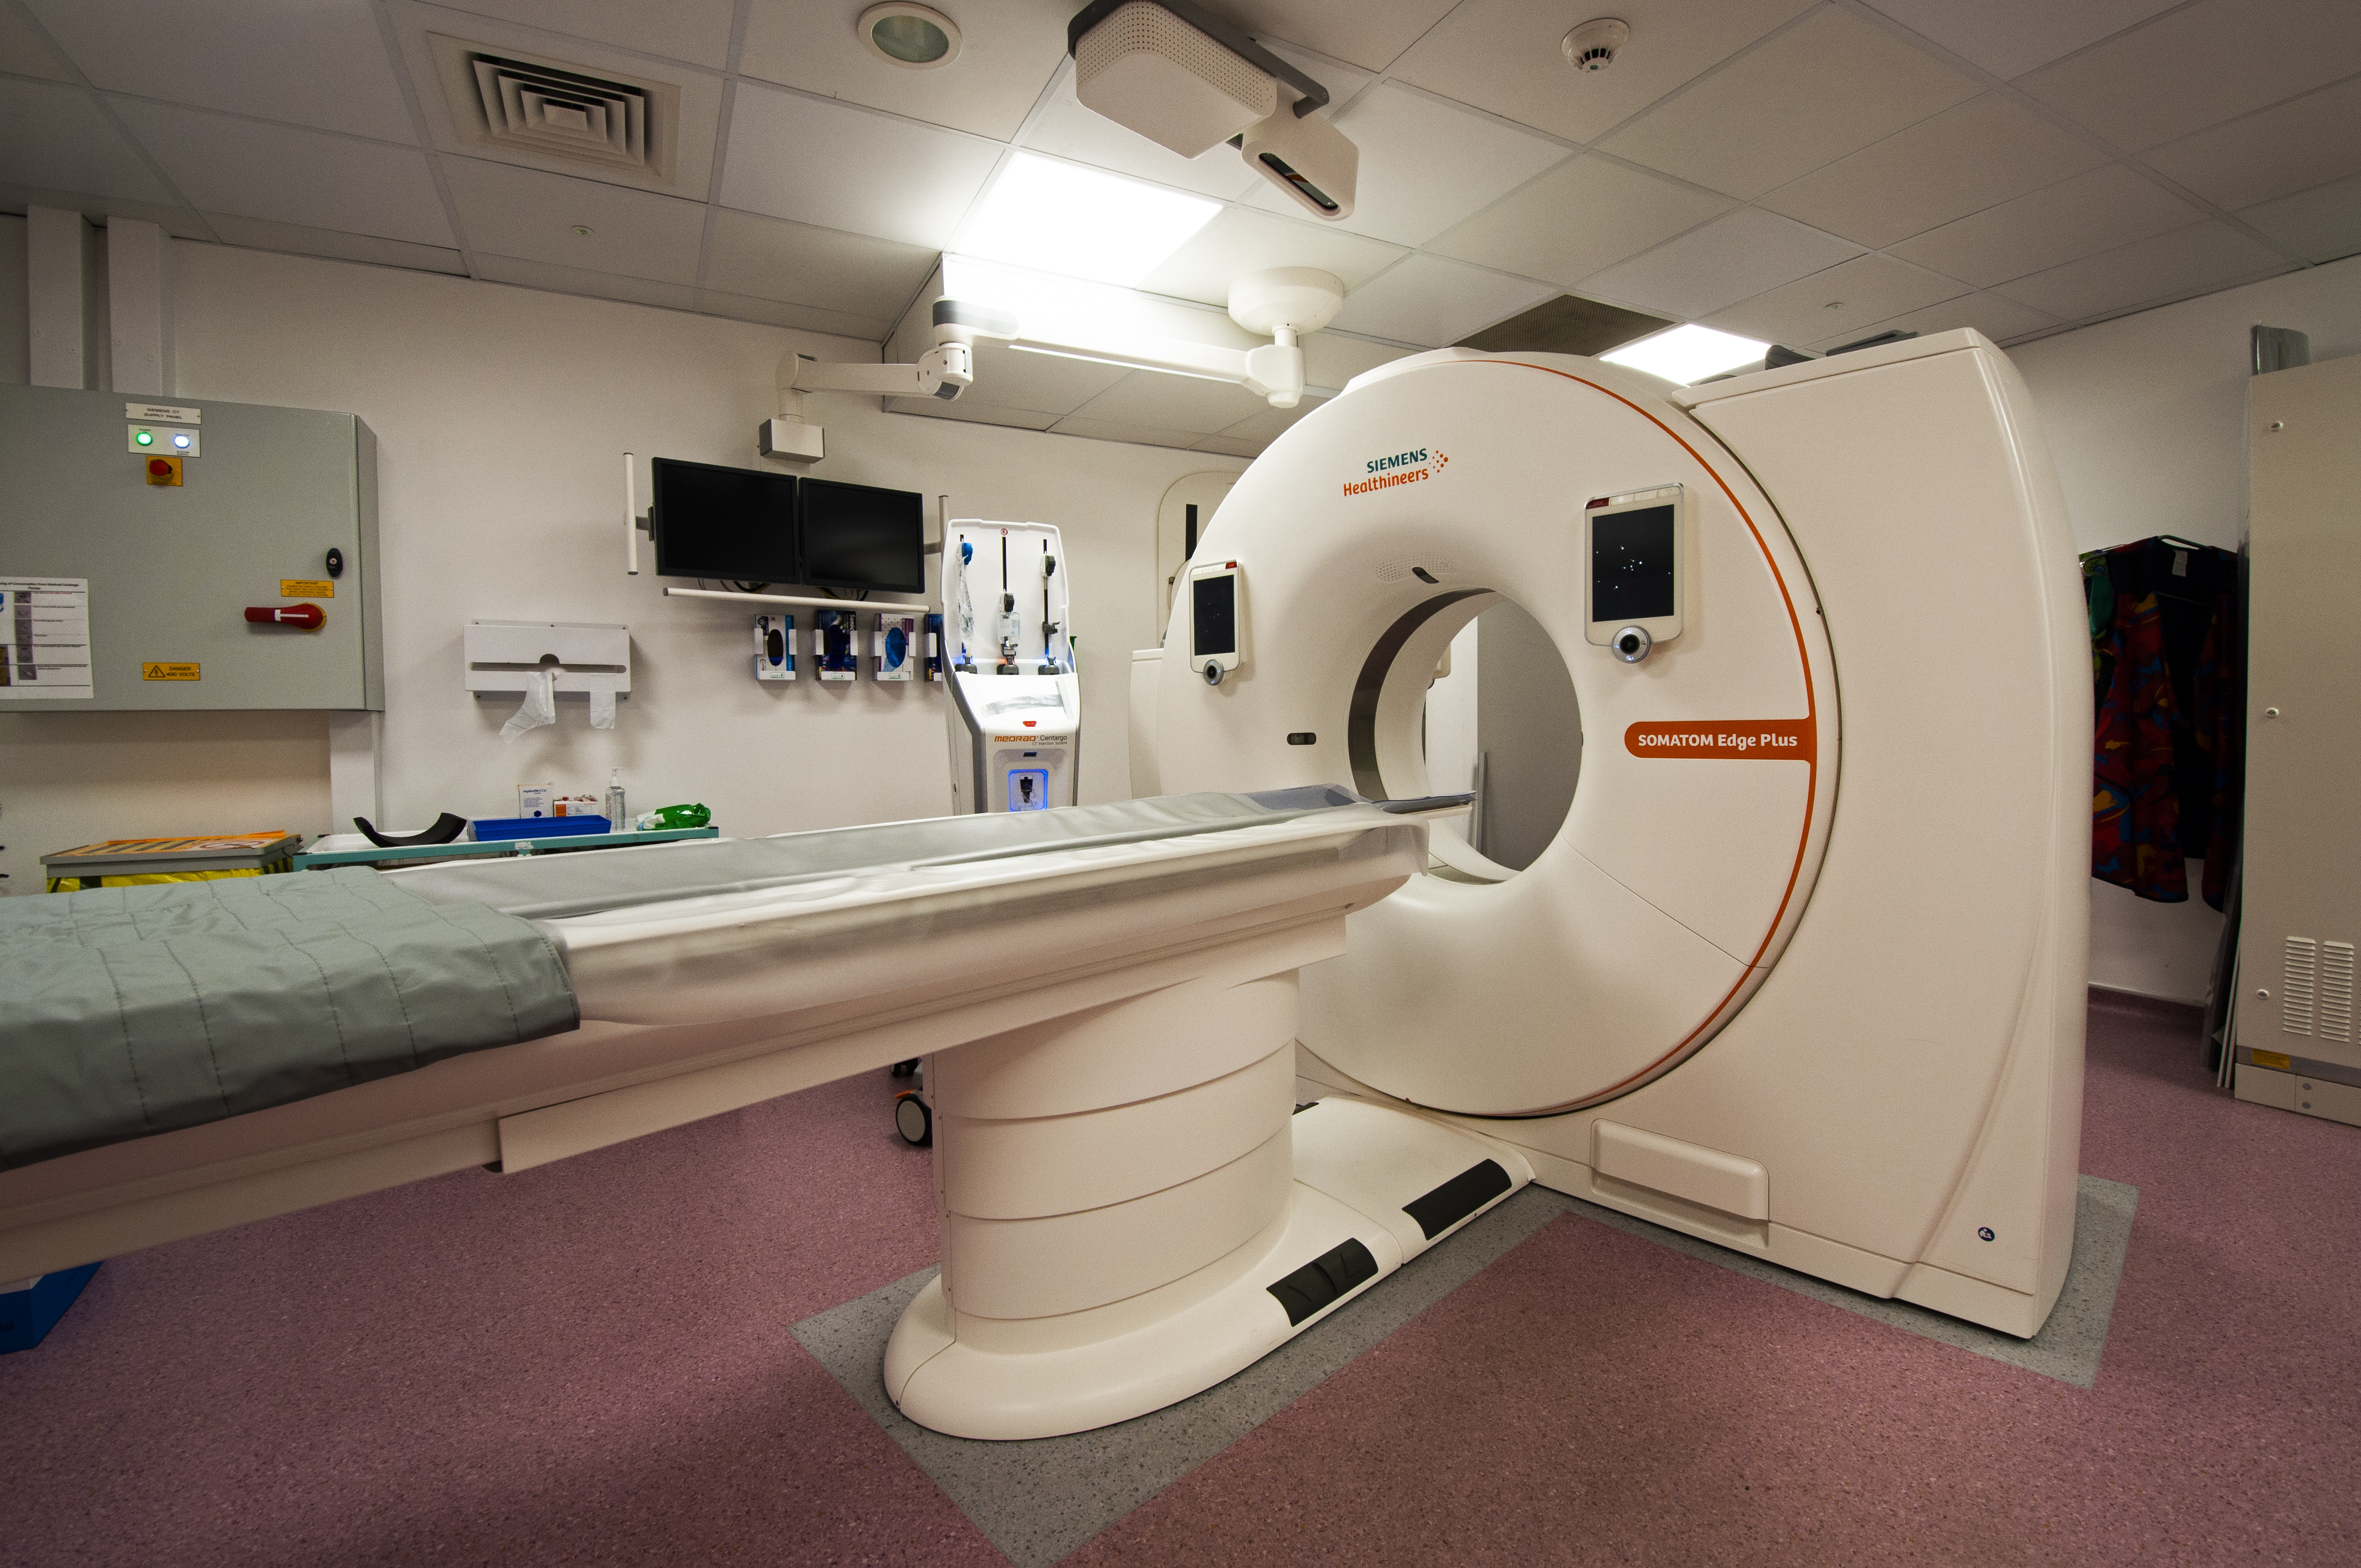 PET CT Radiation Protection - Medical Professionals